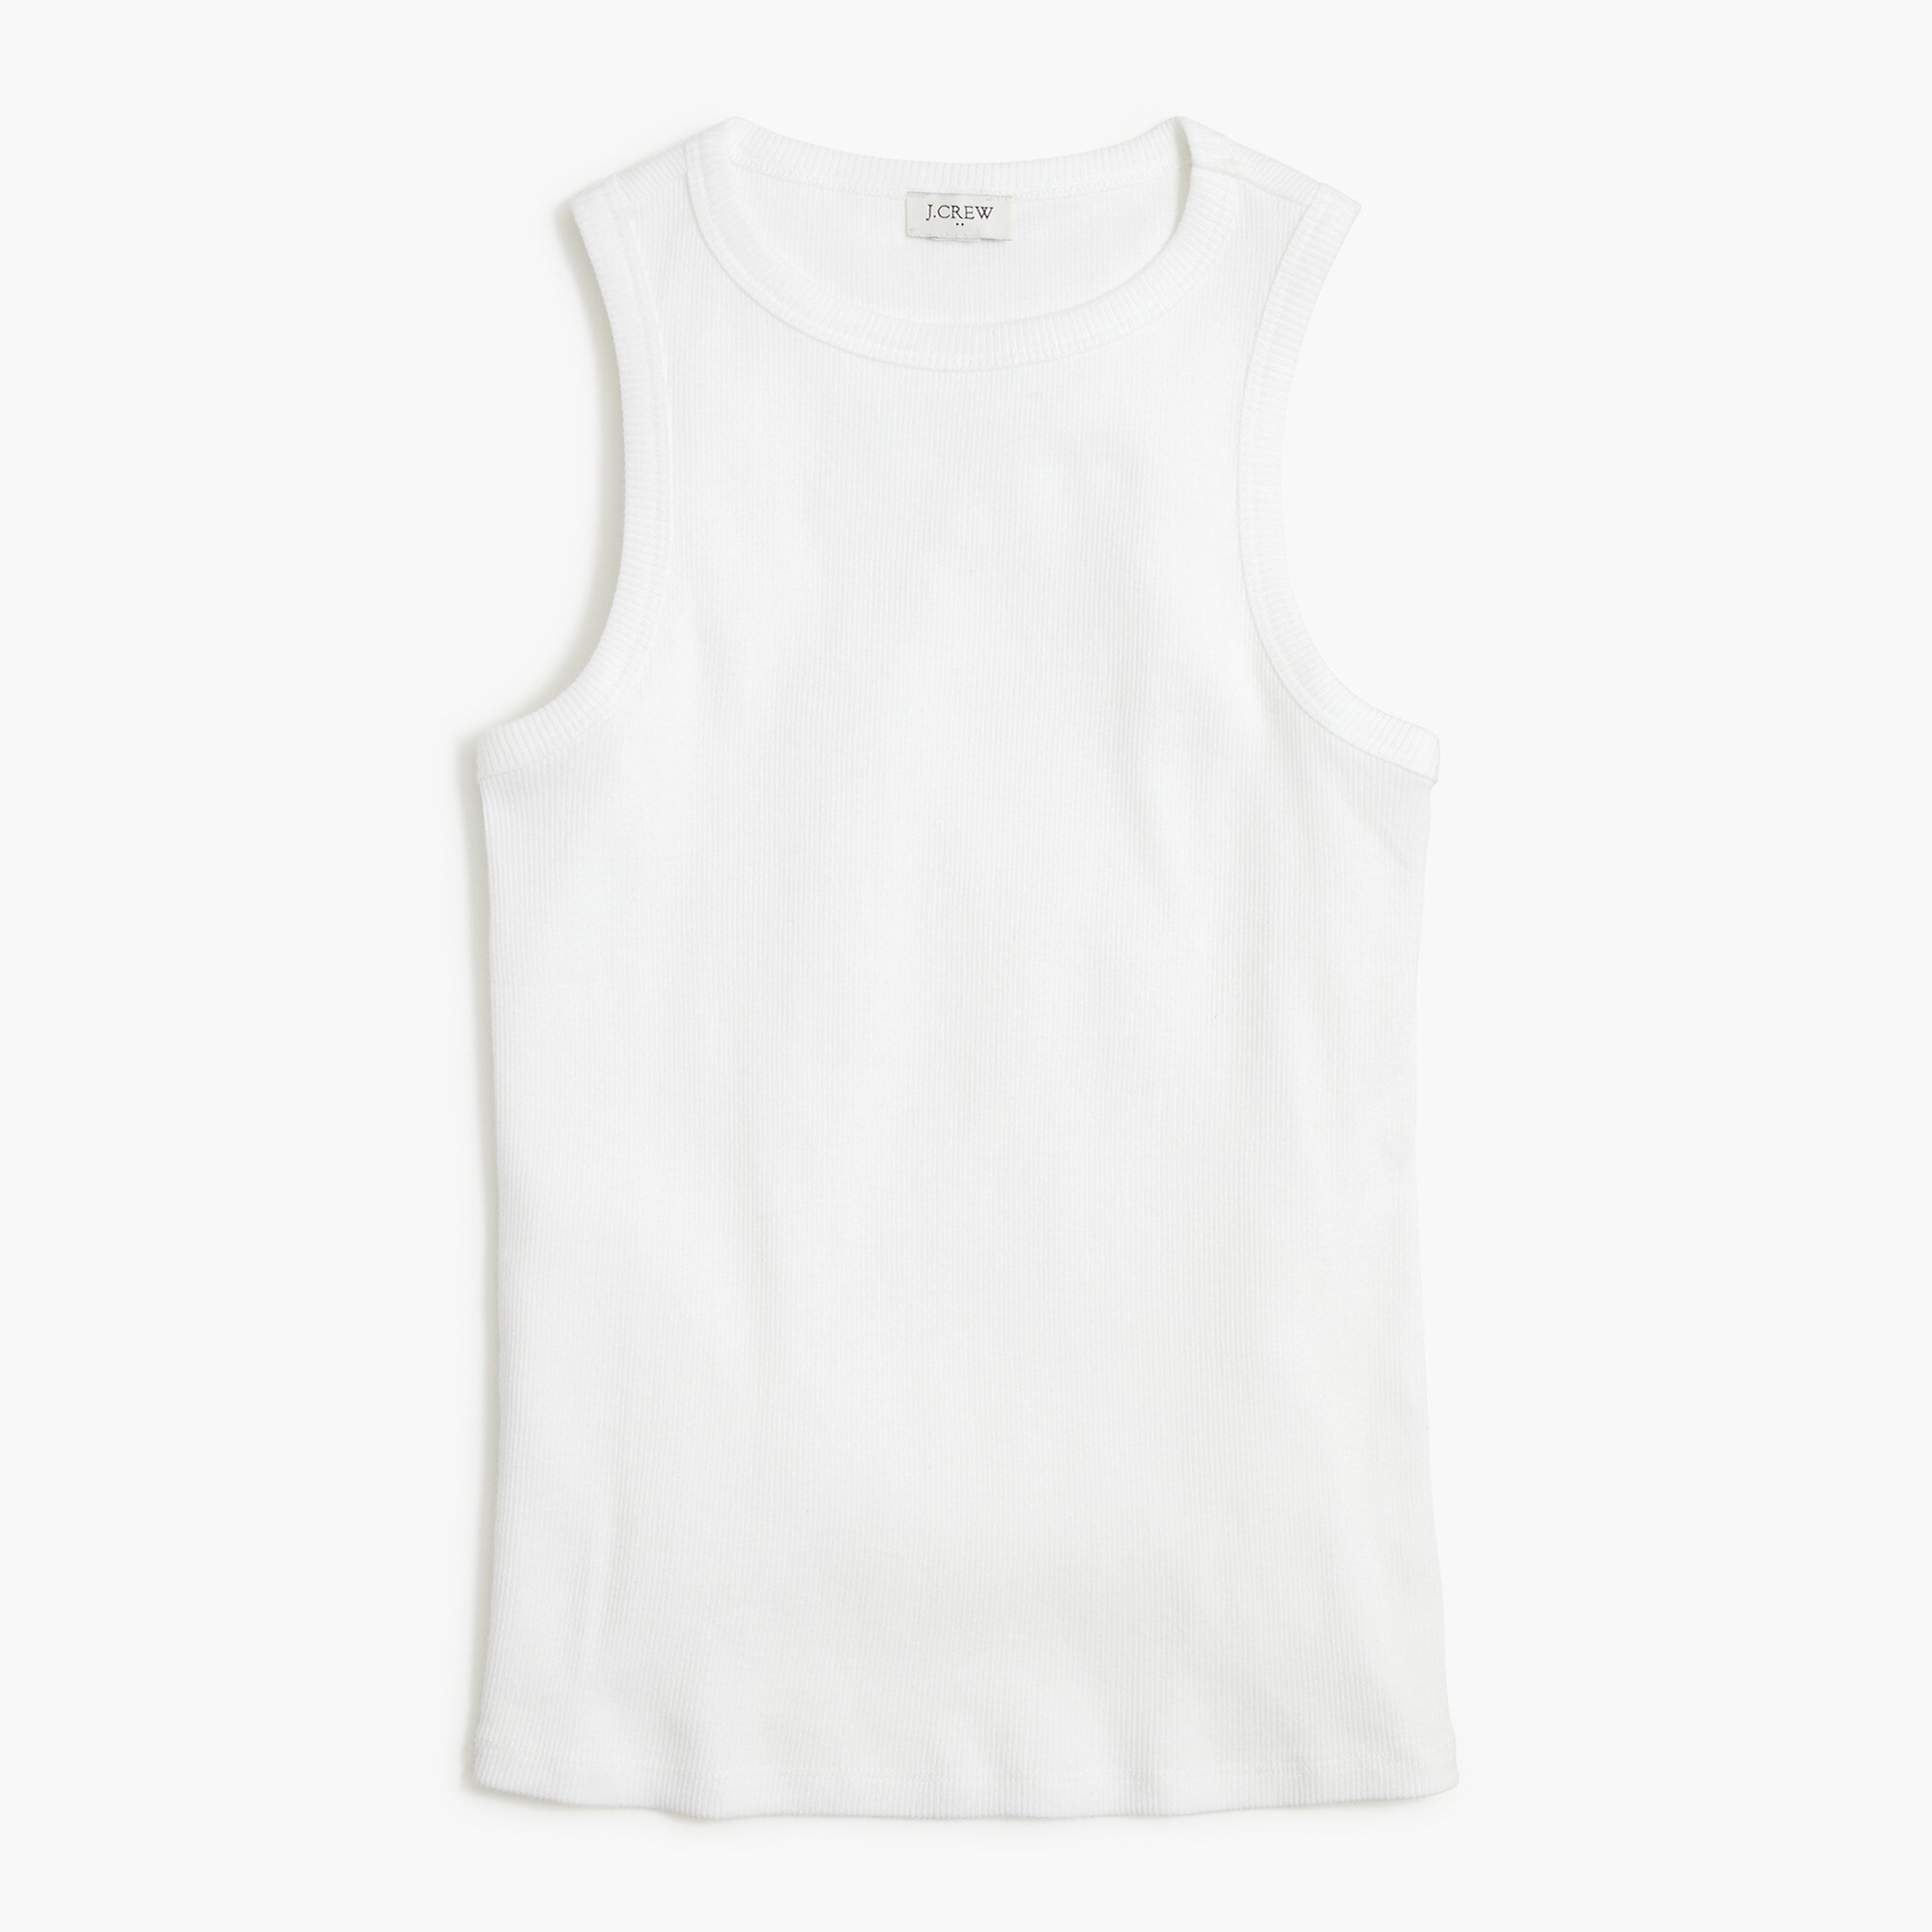 womens High-neck ribbed tank top